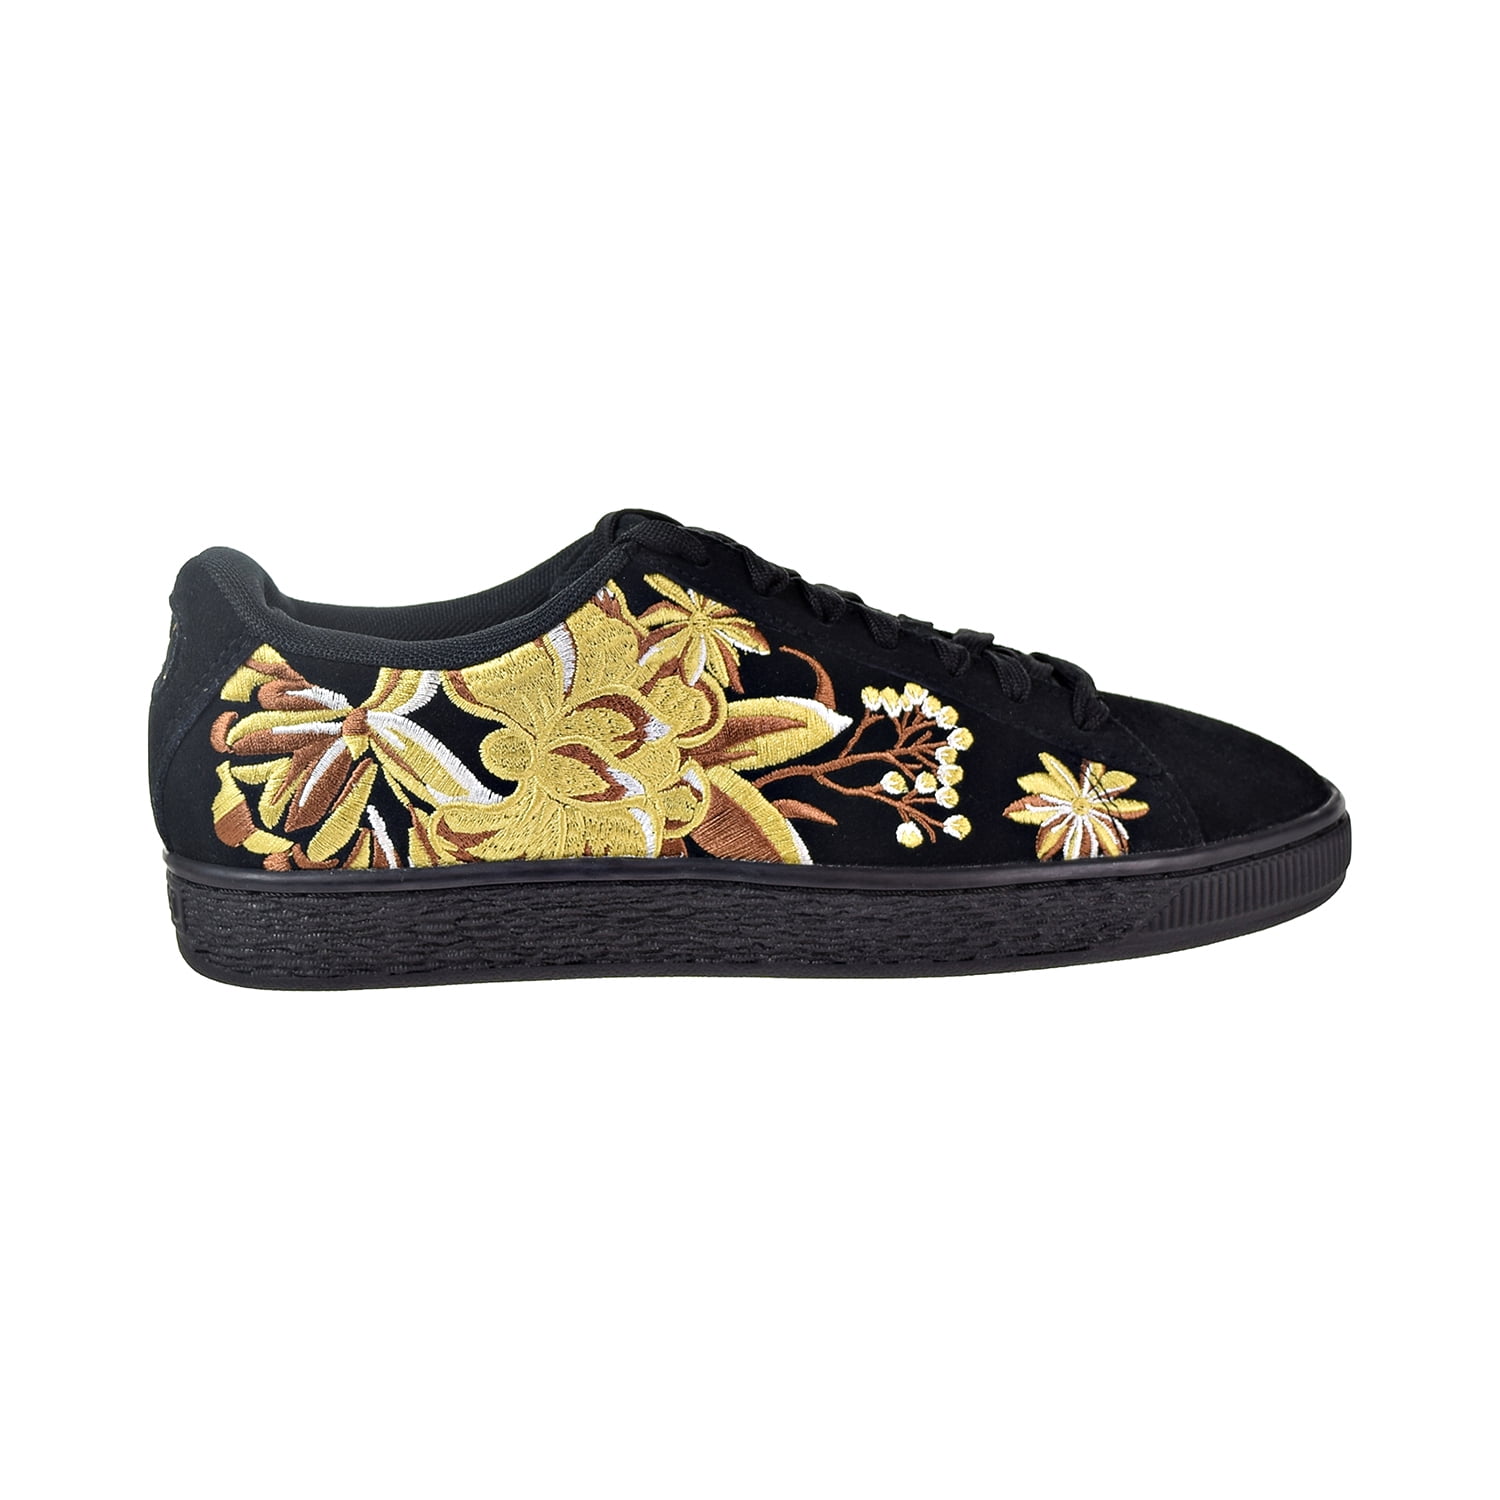 puma black and gold womens shoes